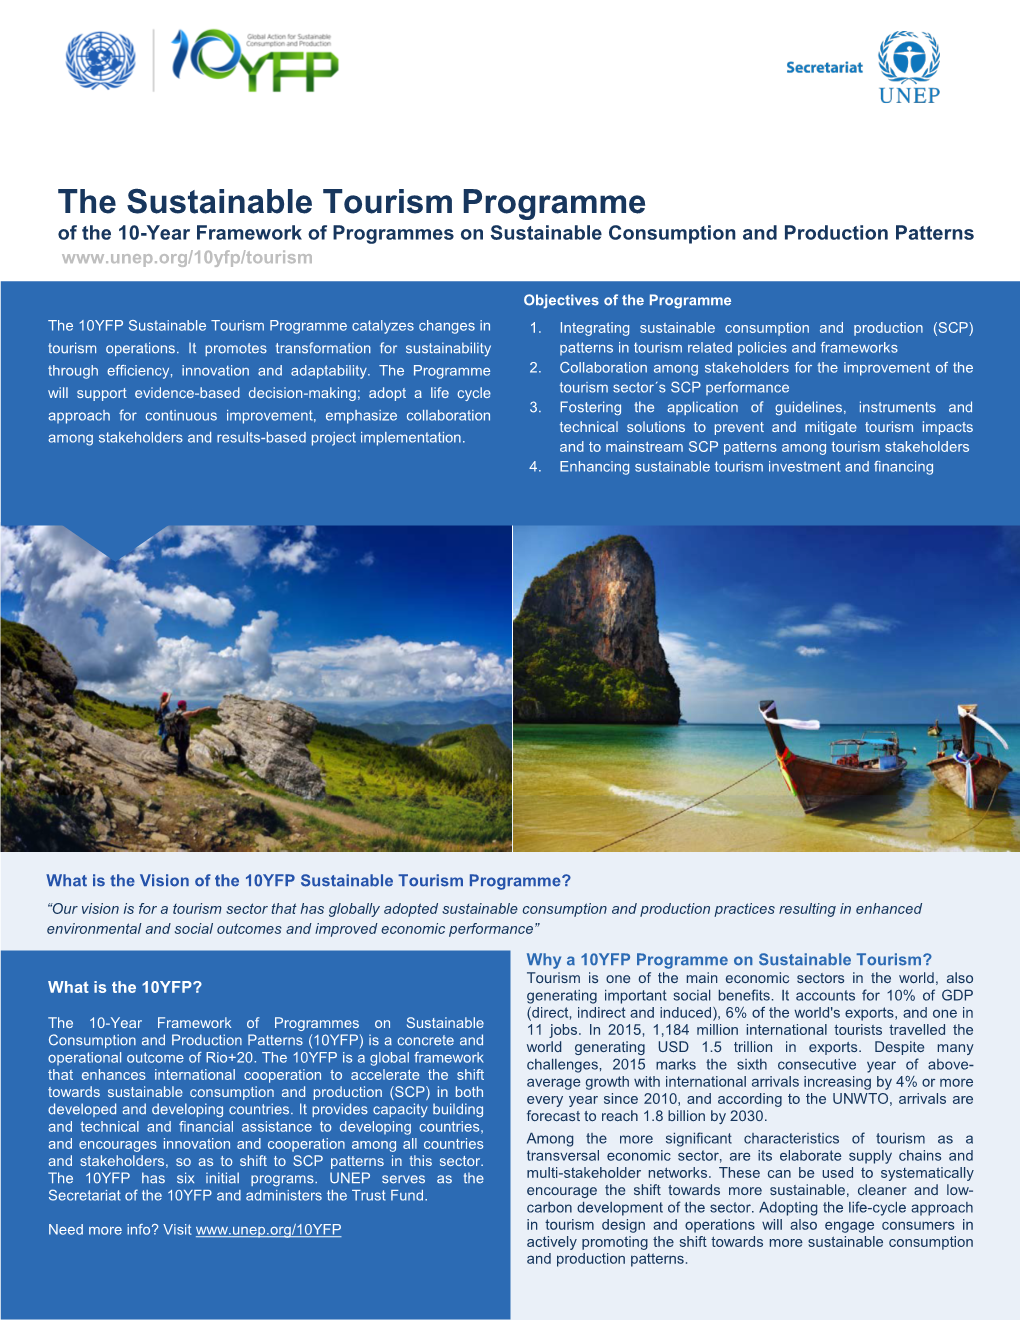 The Sustainable Tourism Programme of the 10-Year Framework of Programmes on Sustainable Consumption and Production Patterns